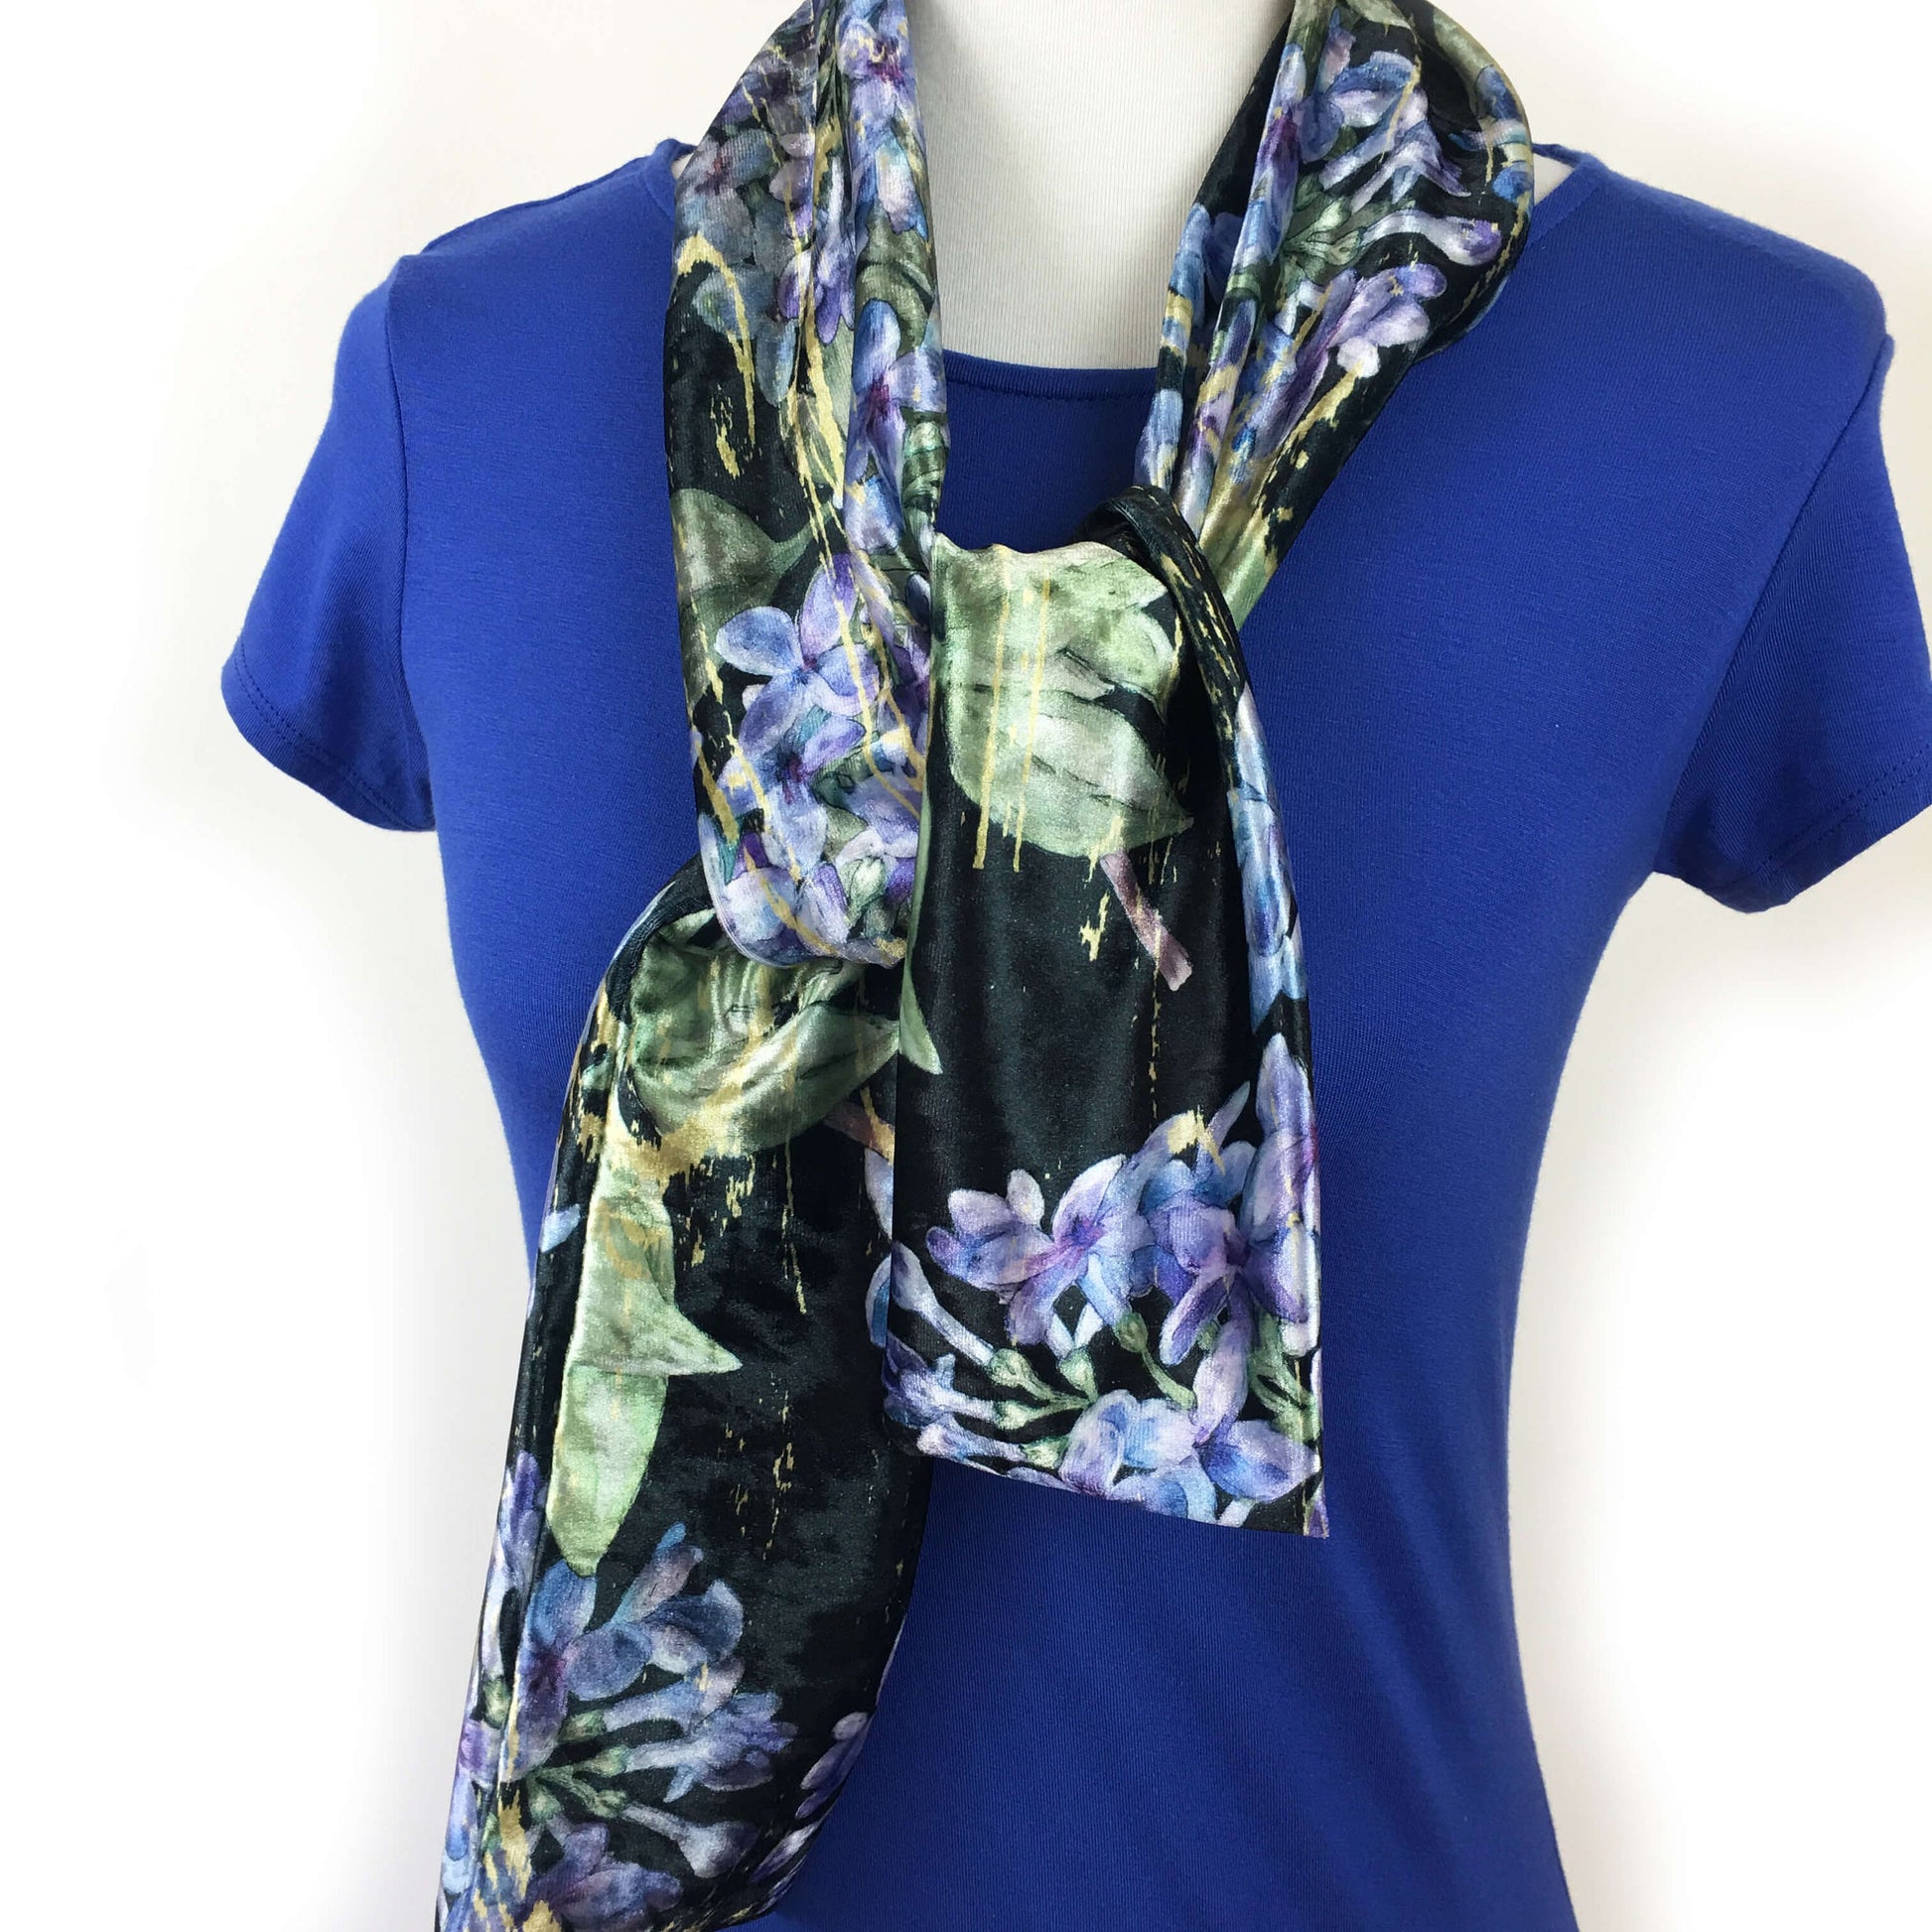 Lilacs Velour Scarf, Womans Scarf, All season, Luminous Scarf, hand painted scarf, artist scarf, Wear all day or evening